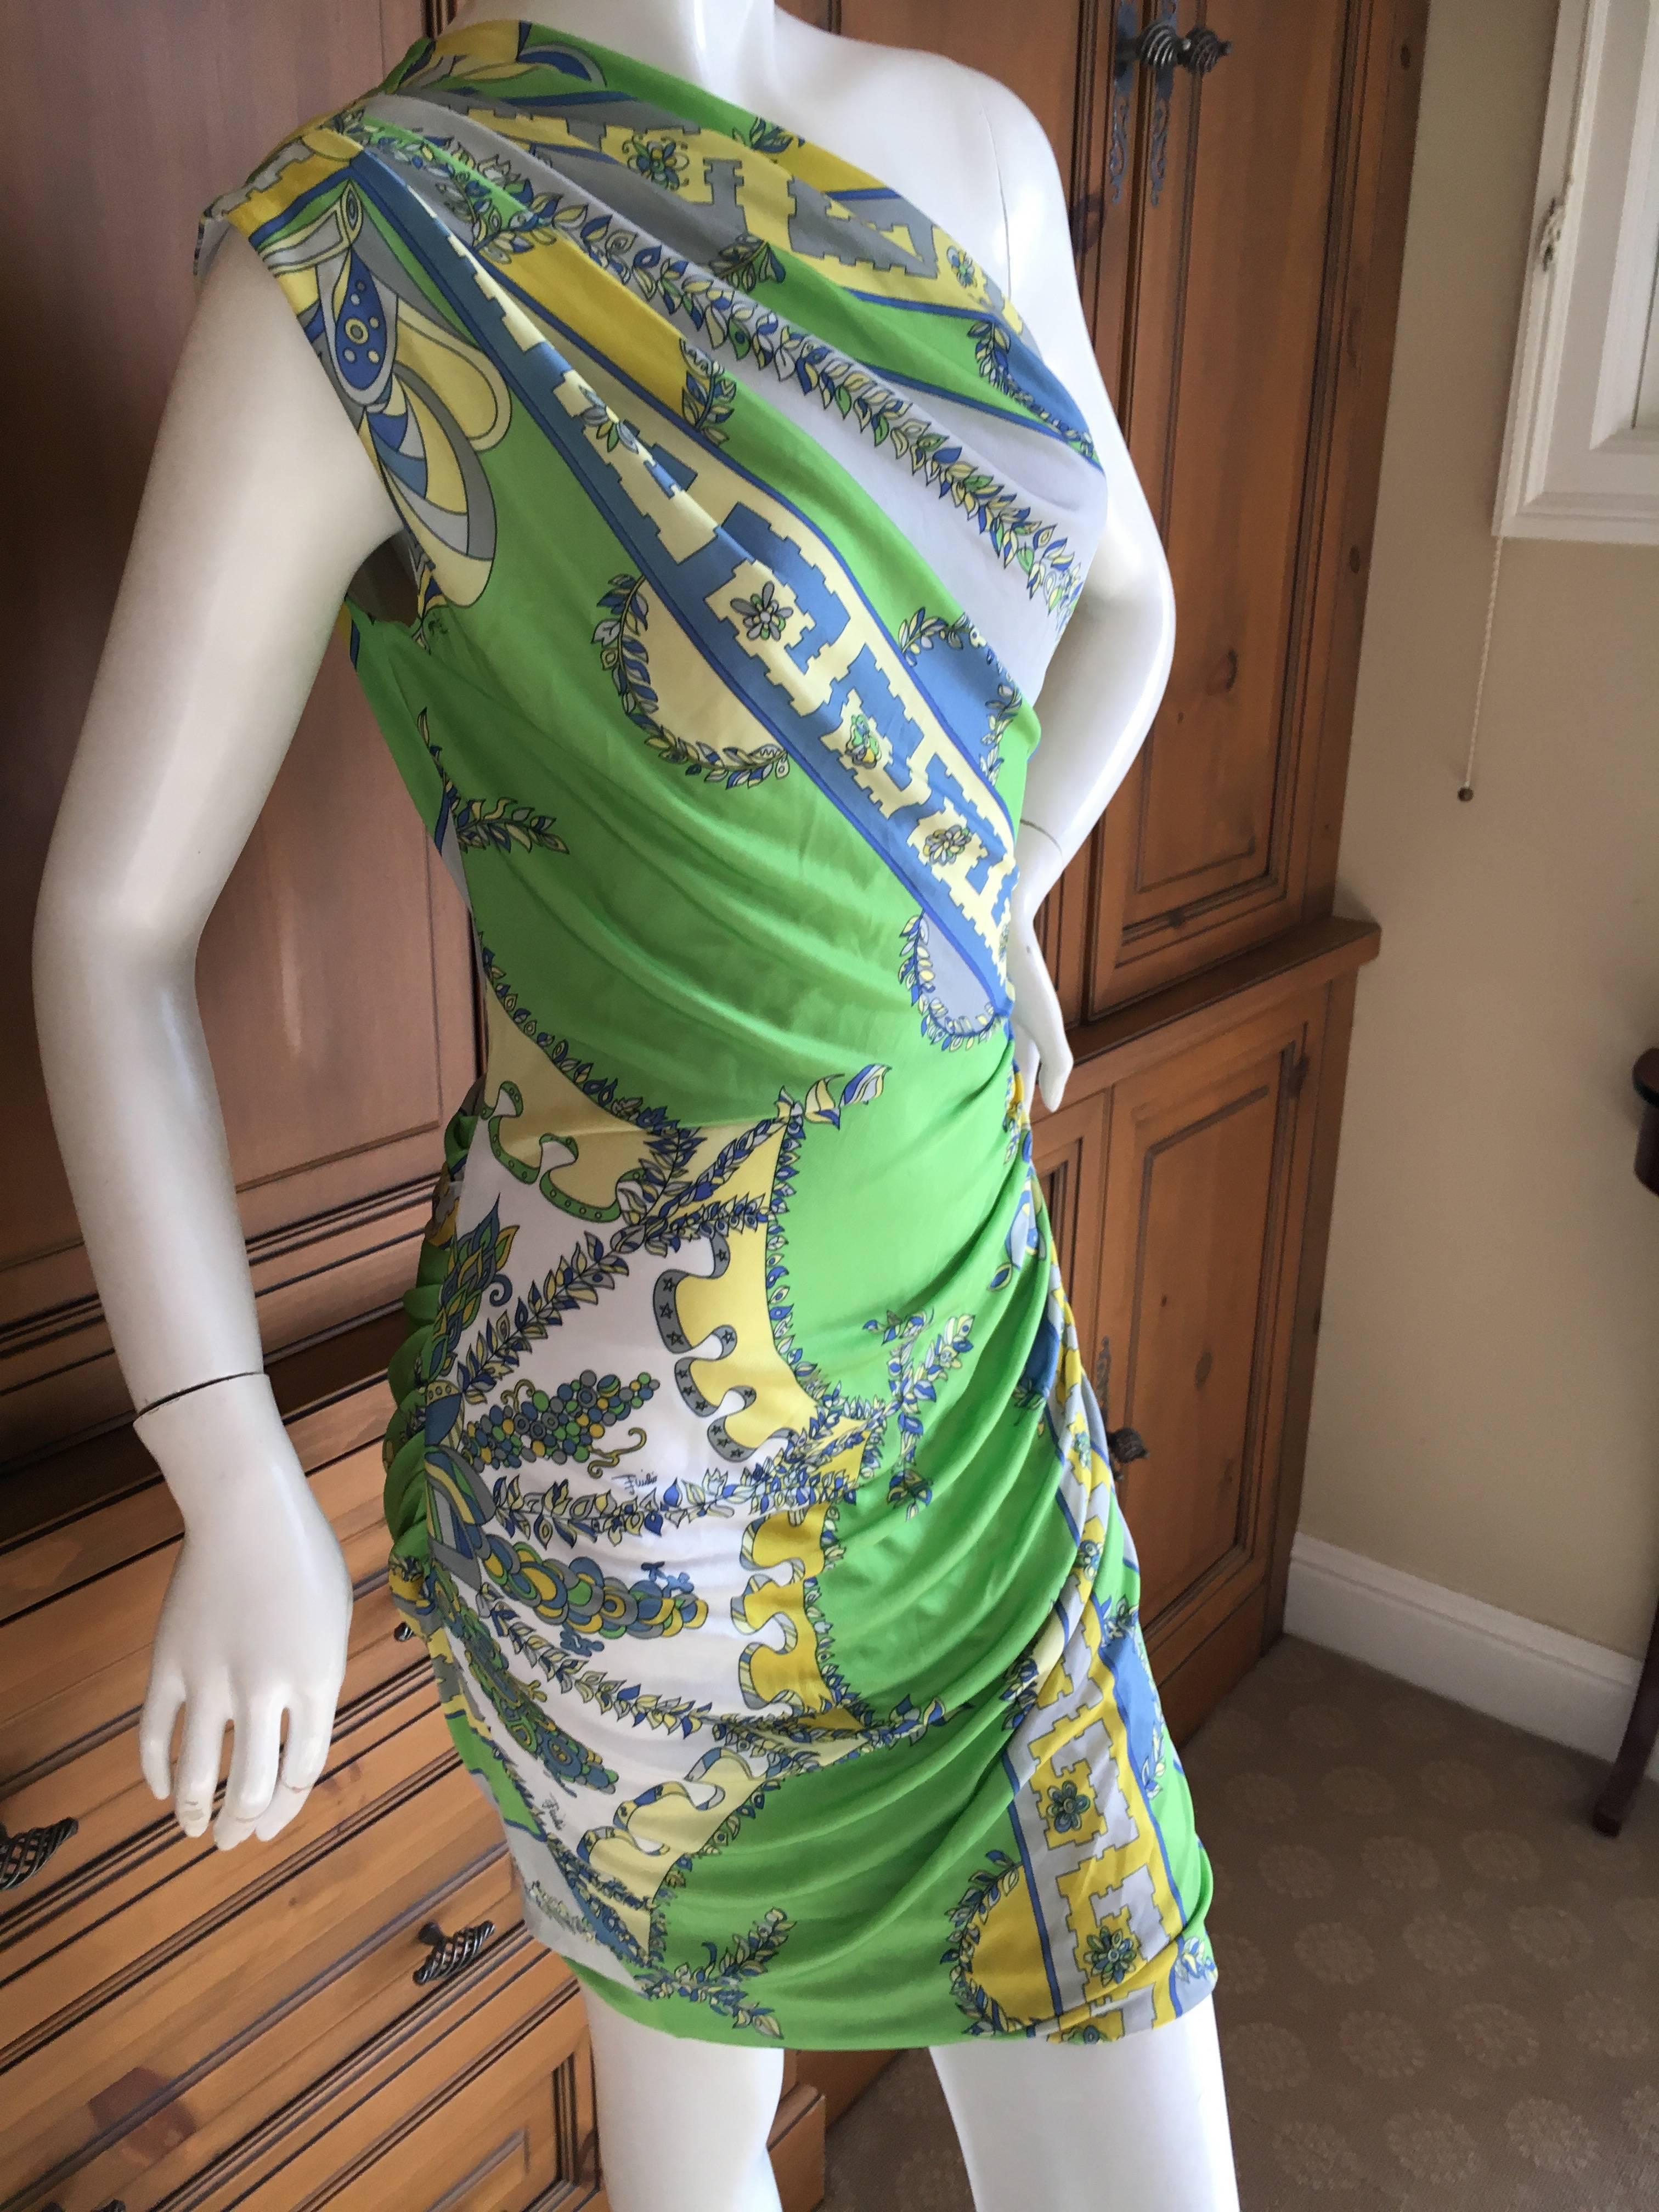 Emilio Pucci One Shoulder Mini Dress In Excellent Condition For Sale In Cloverdale, CA